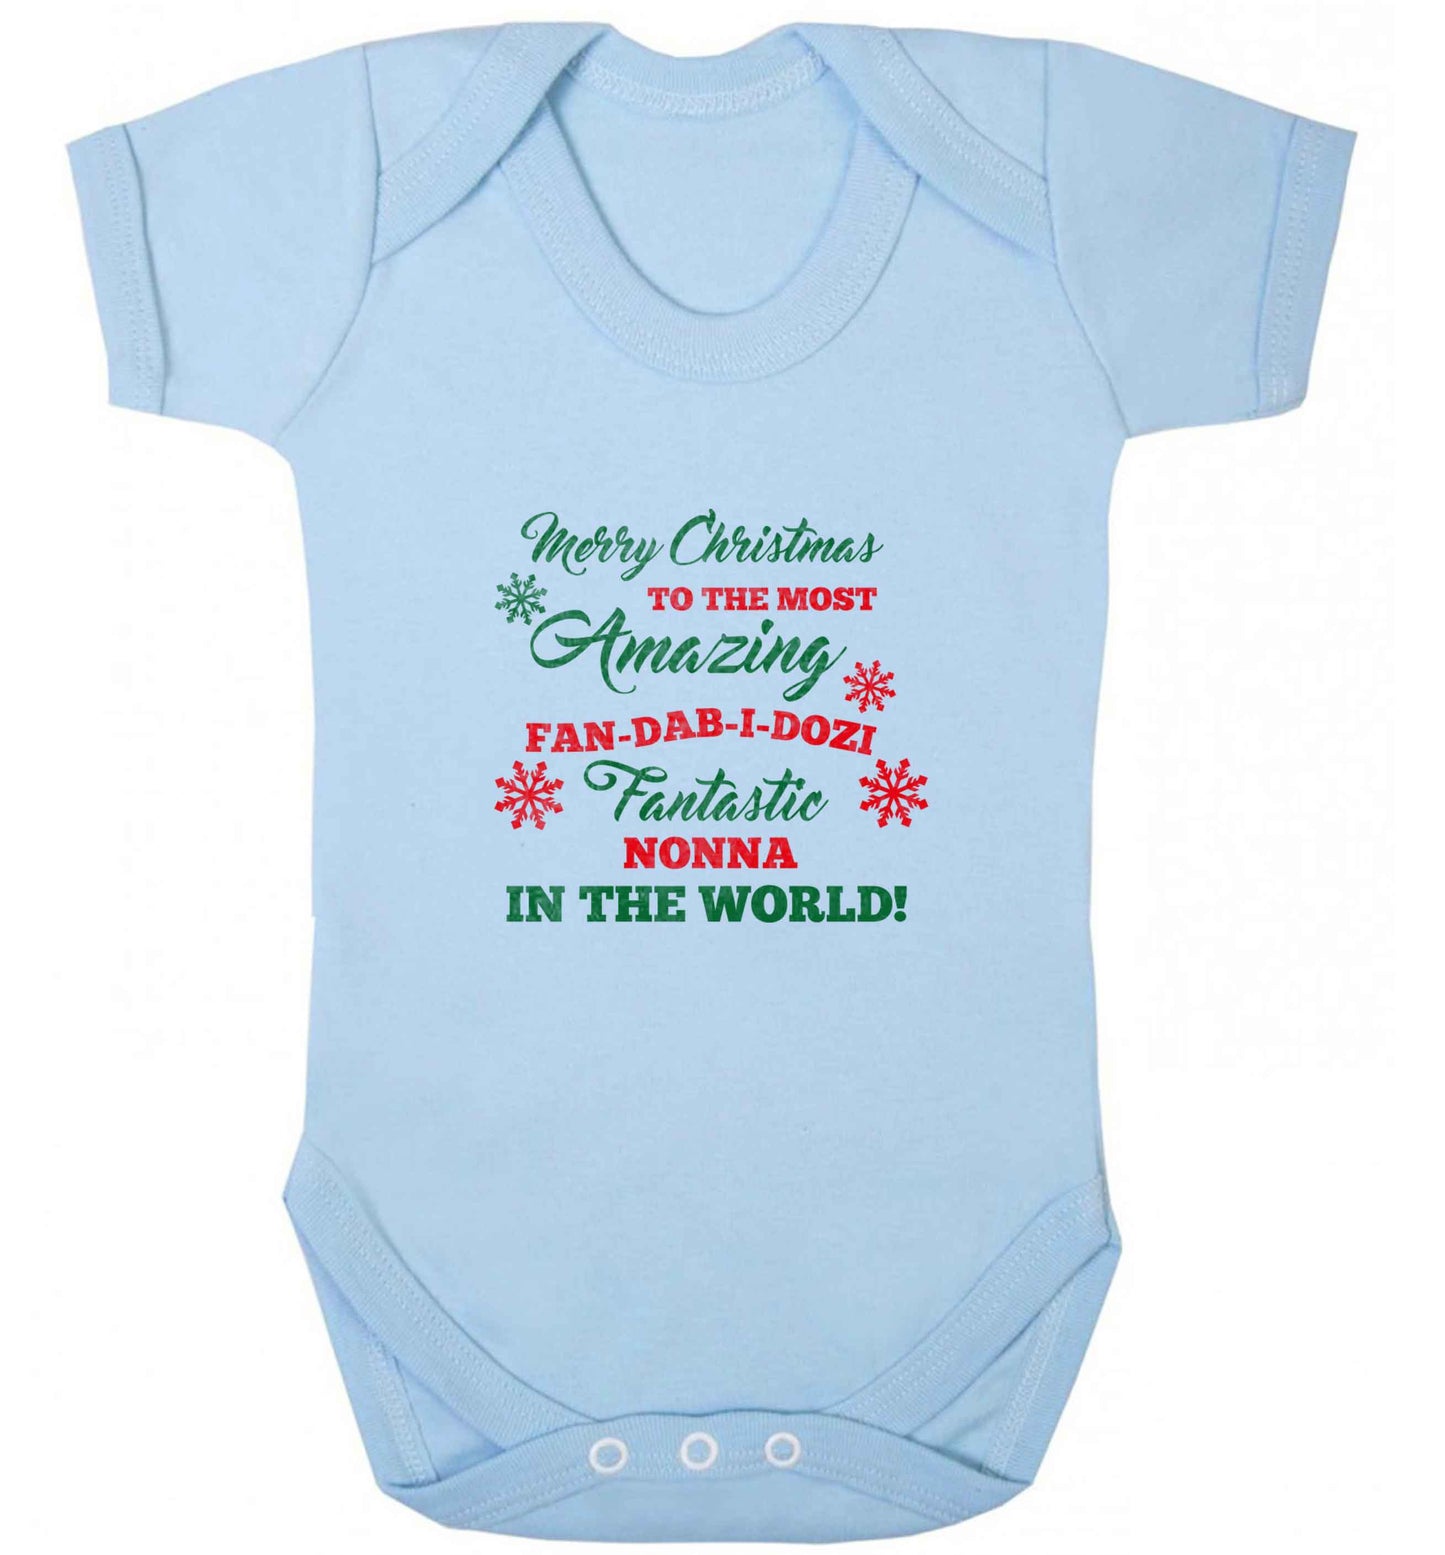 Merry Christmas to the most amazing fan-dab-i-dozi fantasic Nonna in the world baby vest pale blue 18-24 months